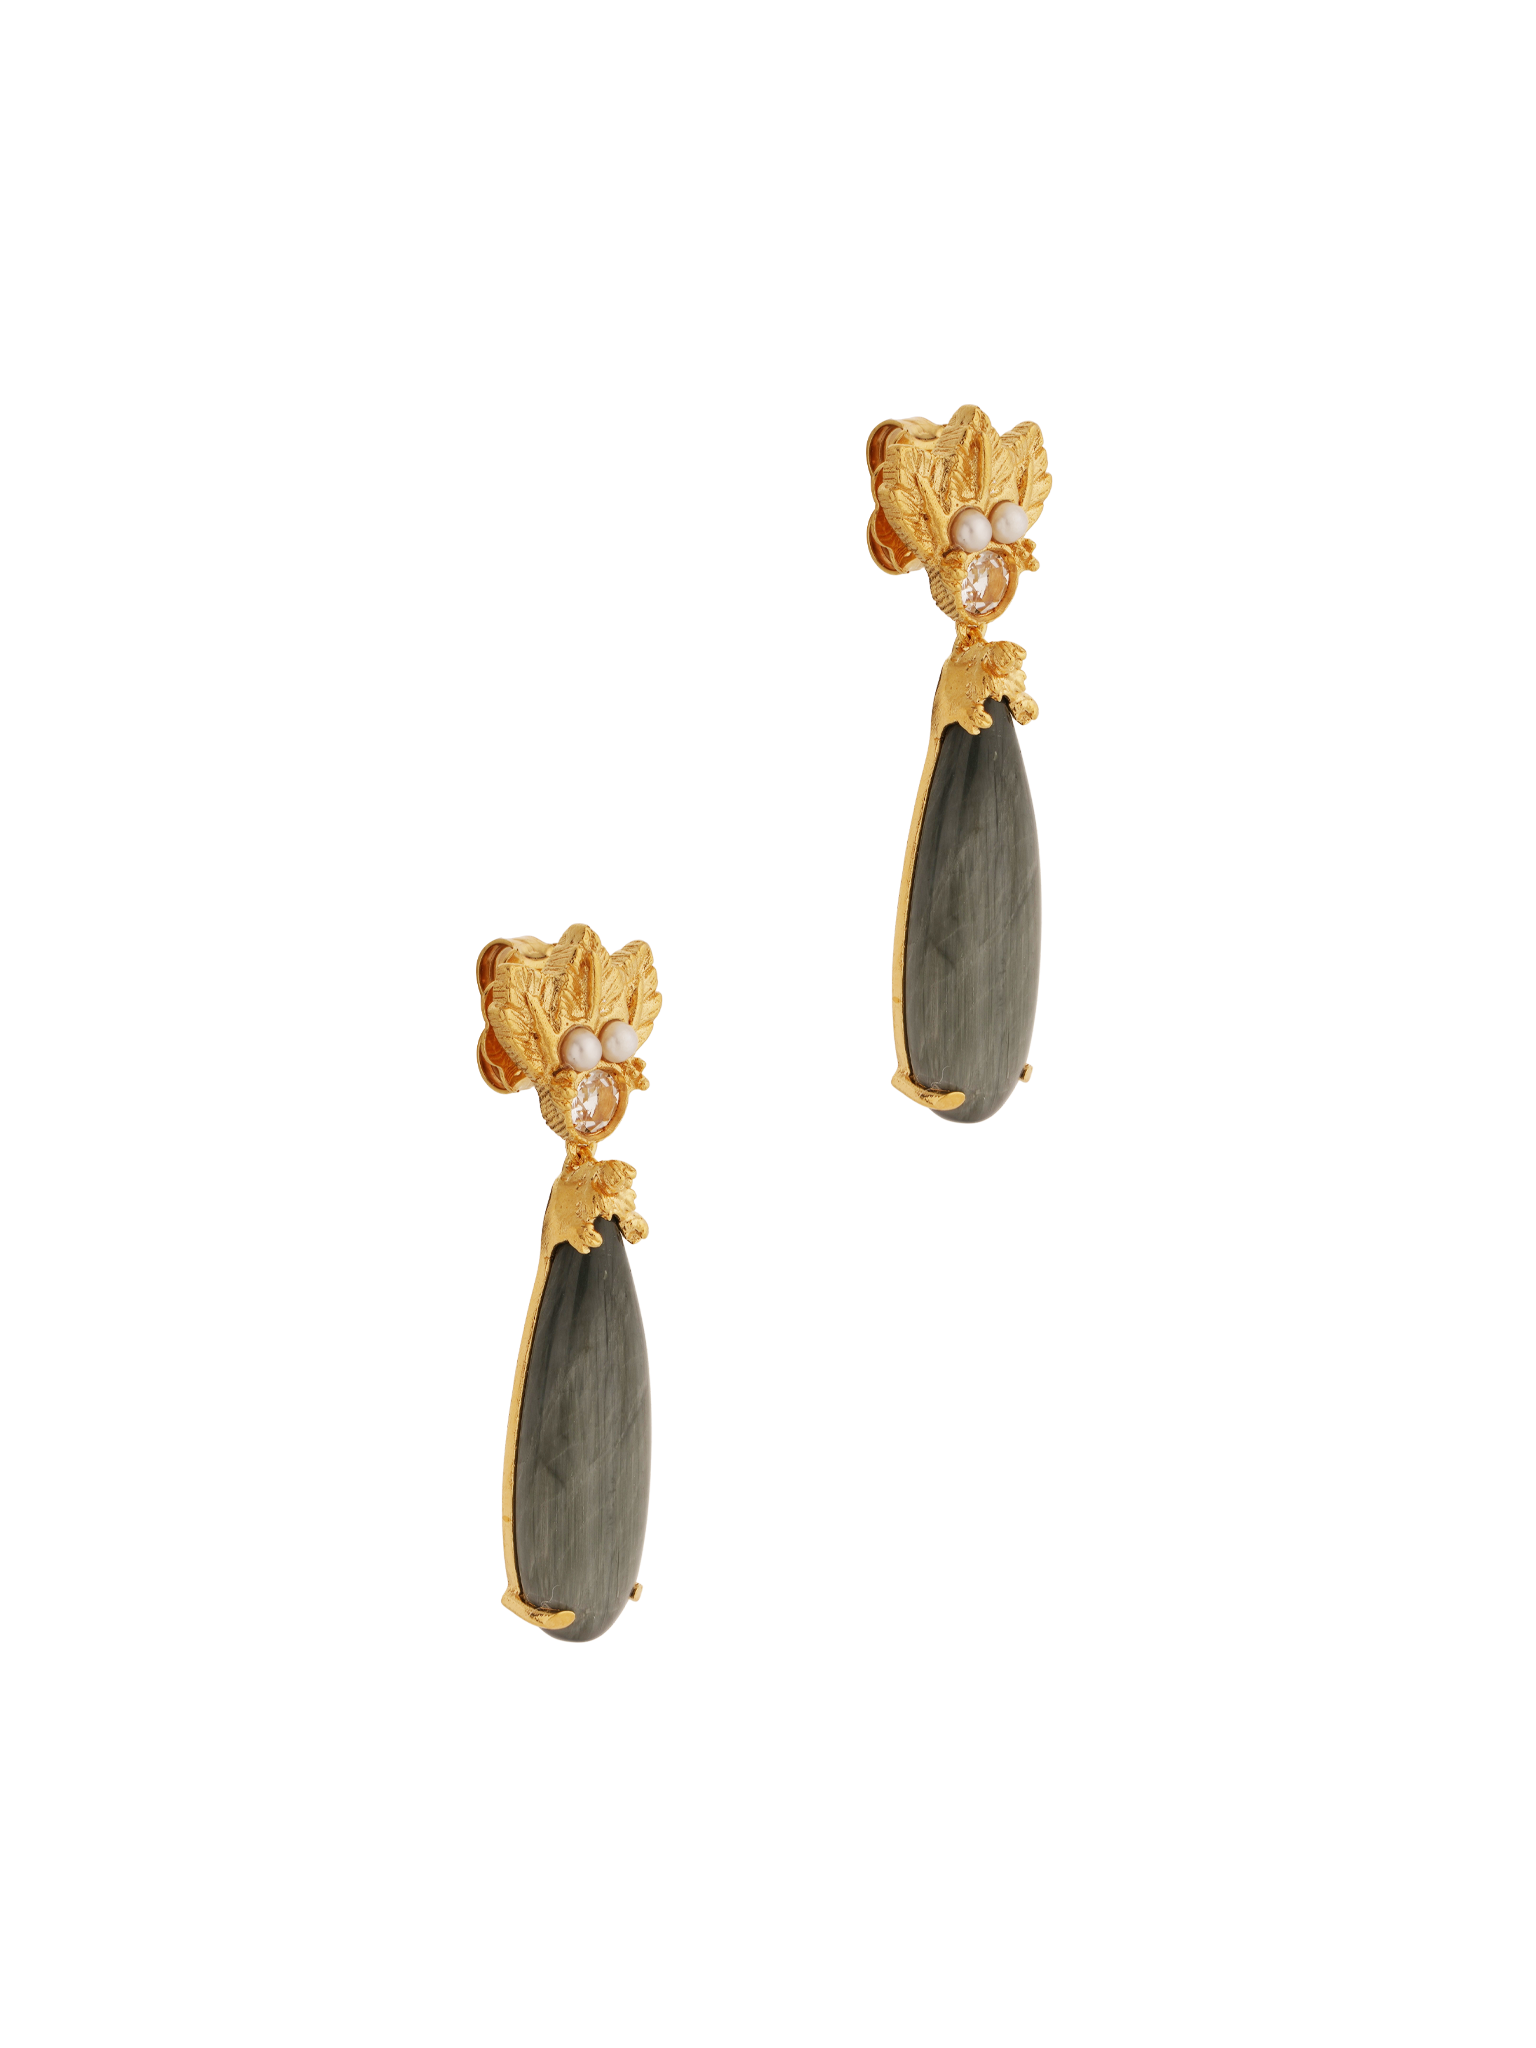 A pair of The Muse III Toed eye earrings by Cremilde Bispo Jewellery with freshwater pearls, drop shaped gemstones and quartz crystals.